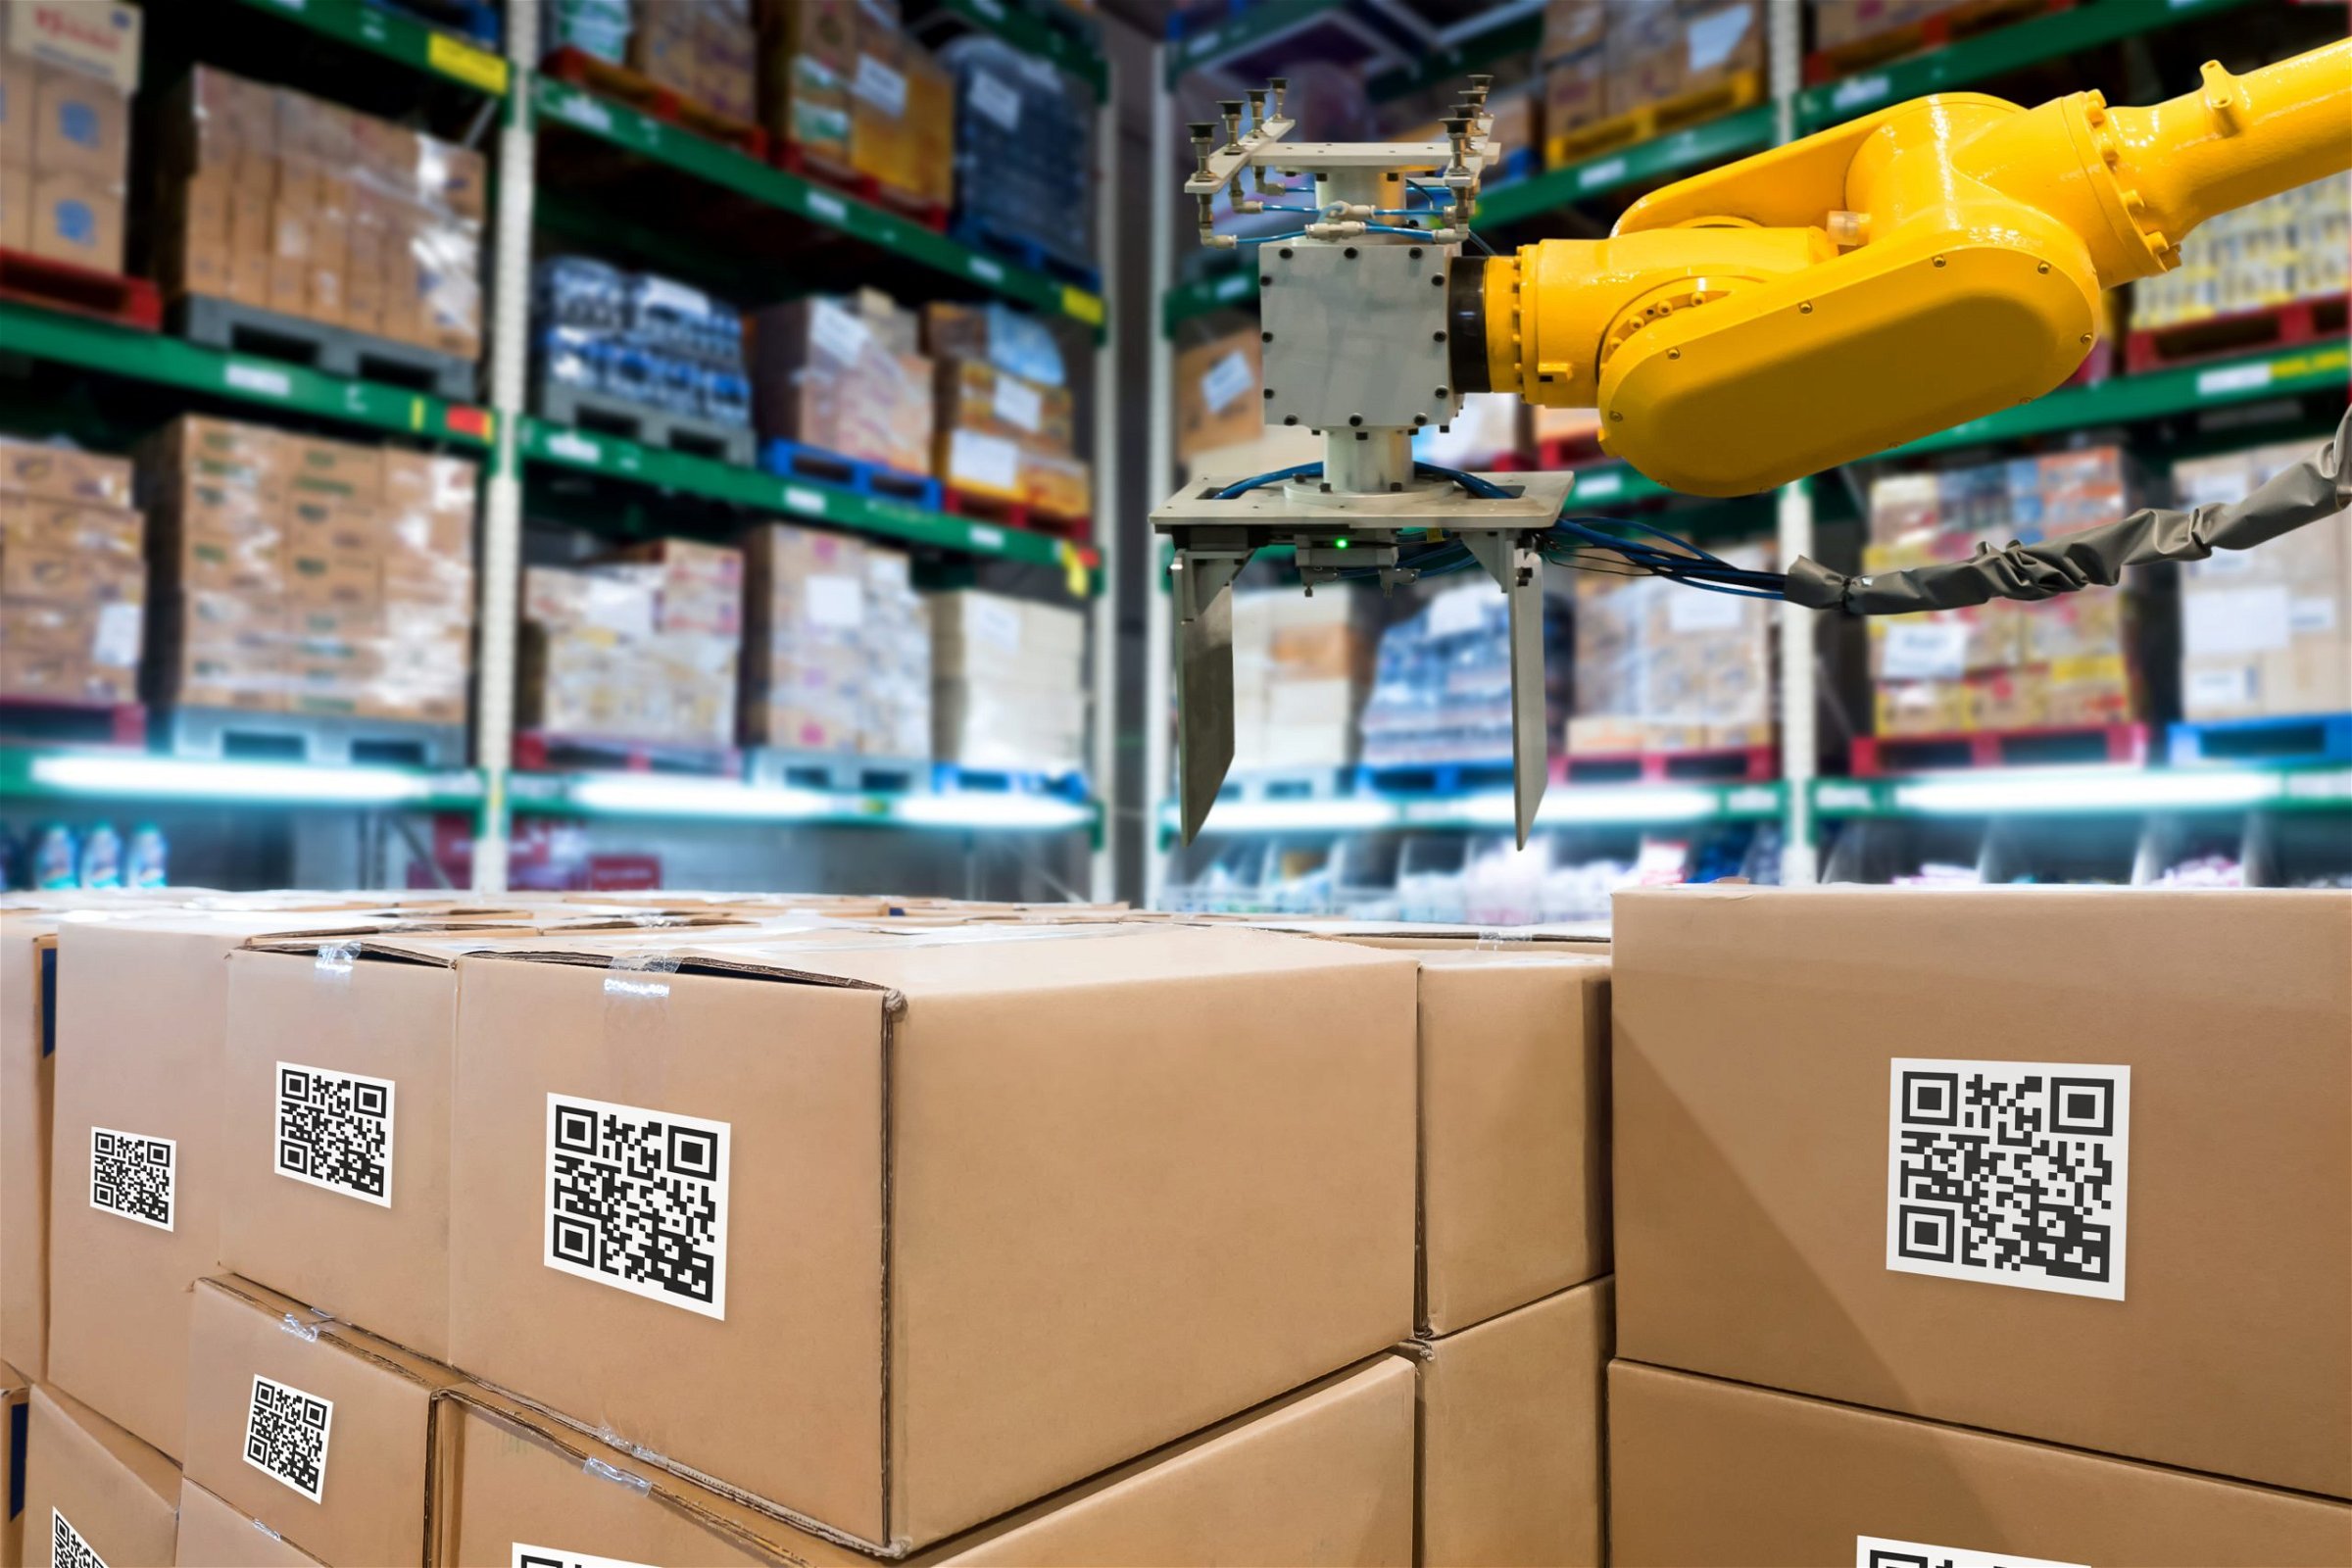 Can blockchain resolve certainties in supply chains?